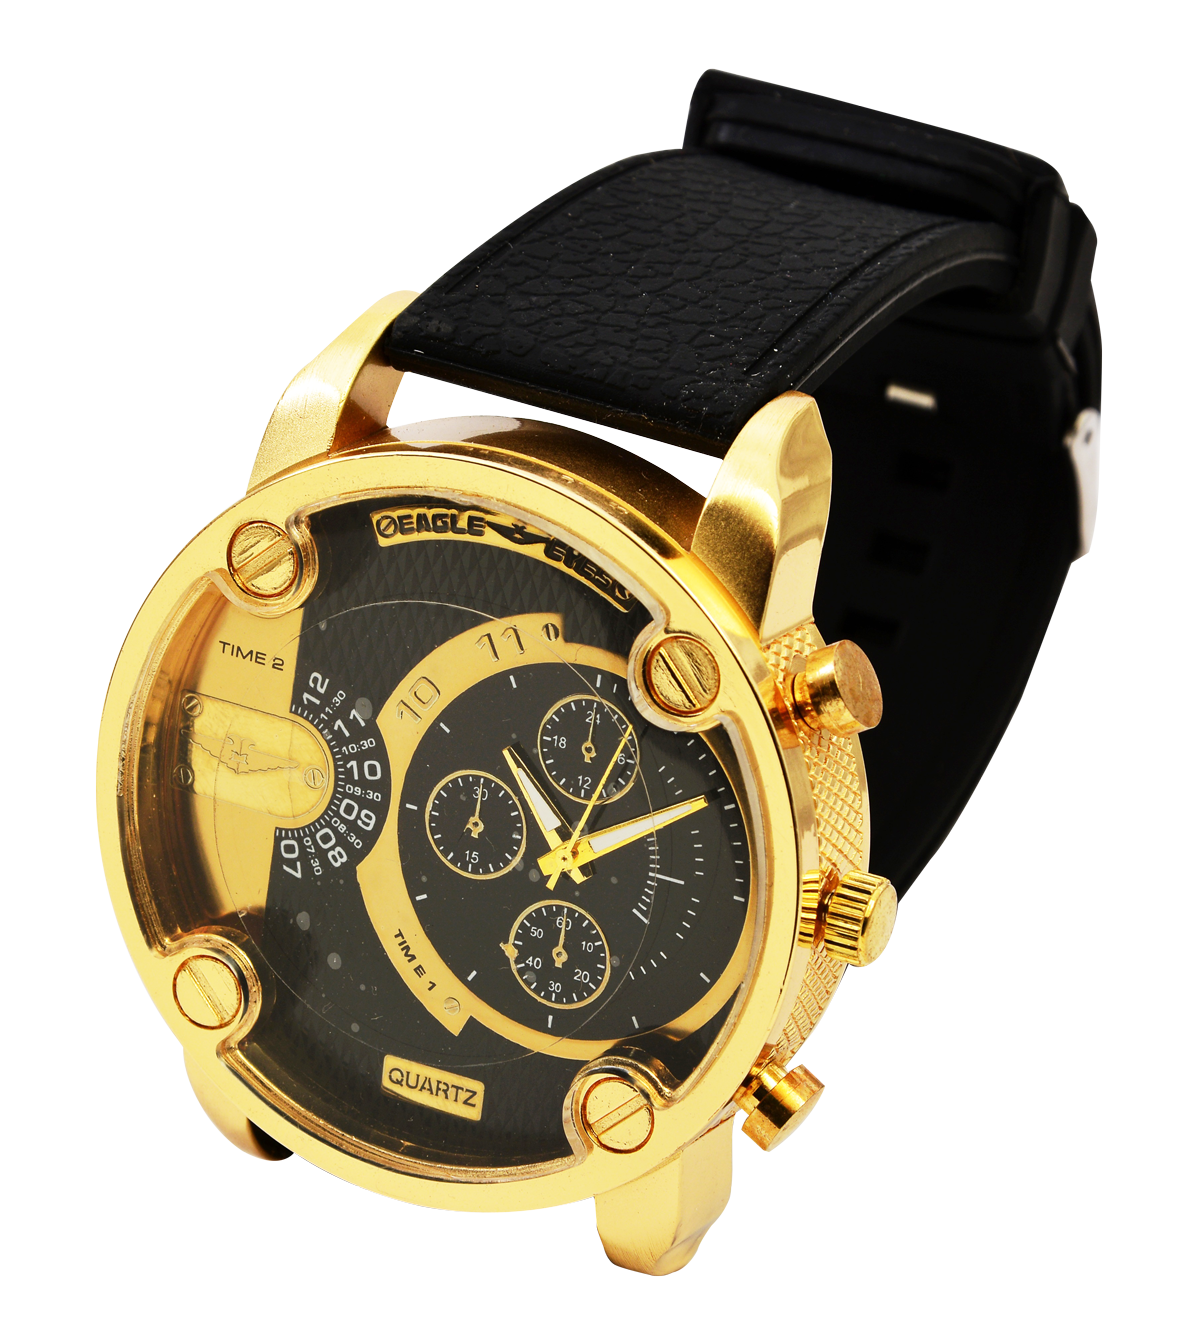 A Gold Watch With A Black Band